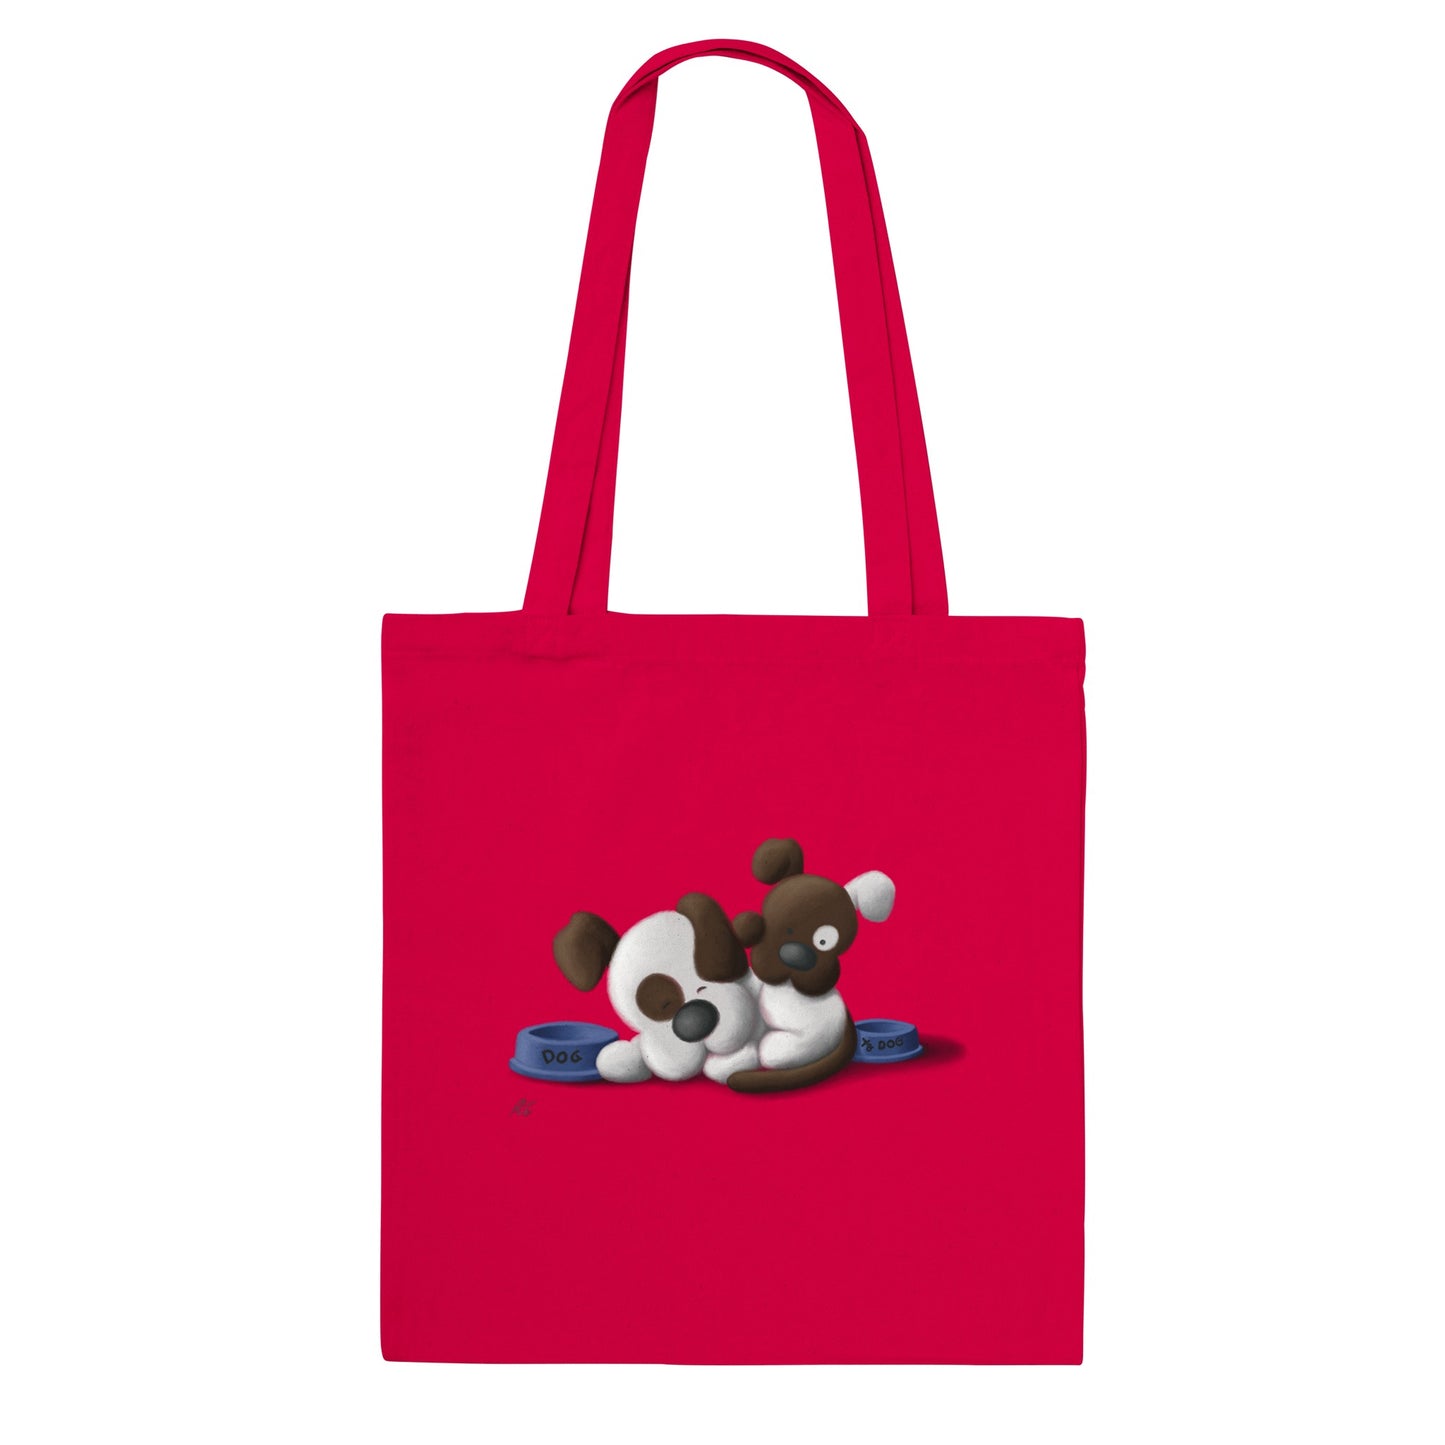 "Wake up Dad, it's time for Dinner!" - Classic Tote Bag (5 colour choices)